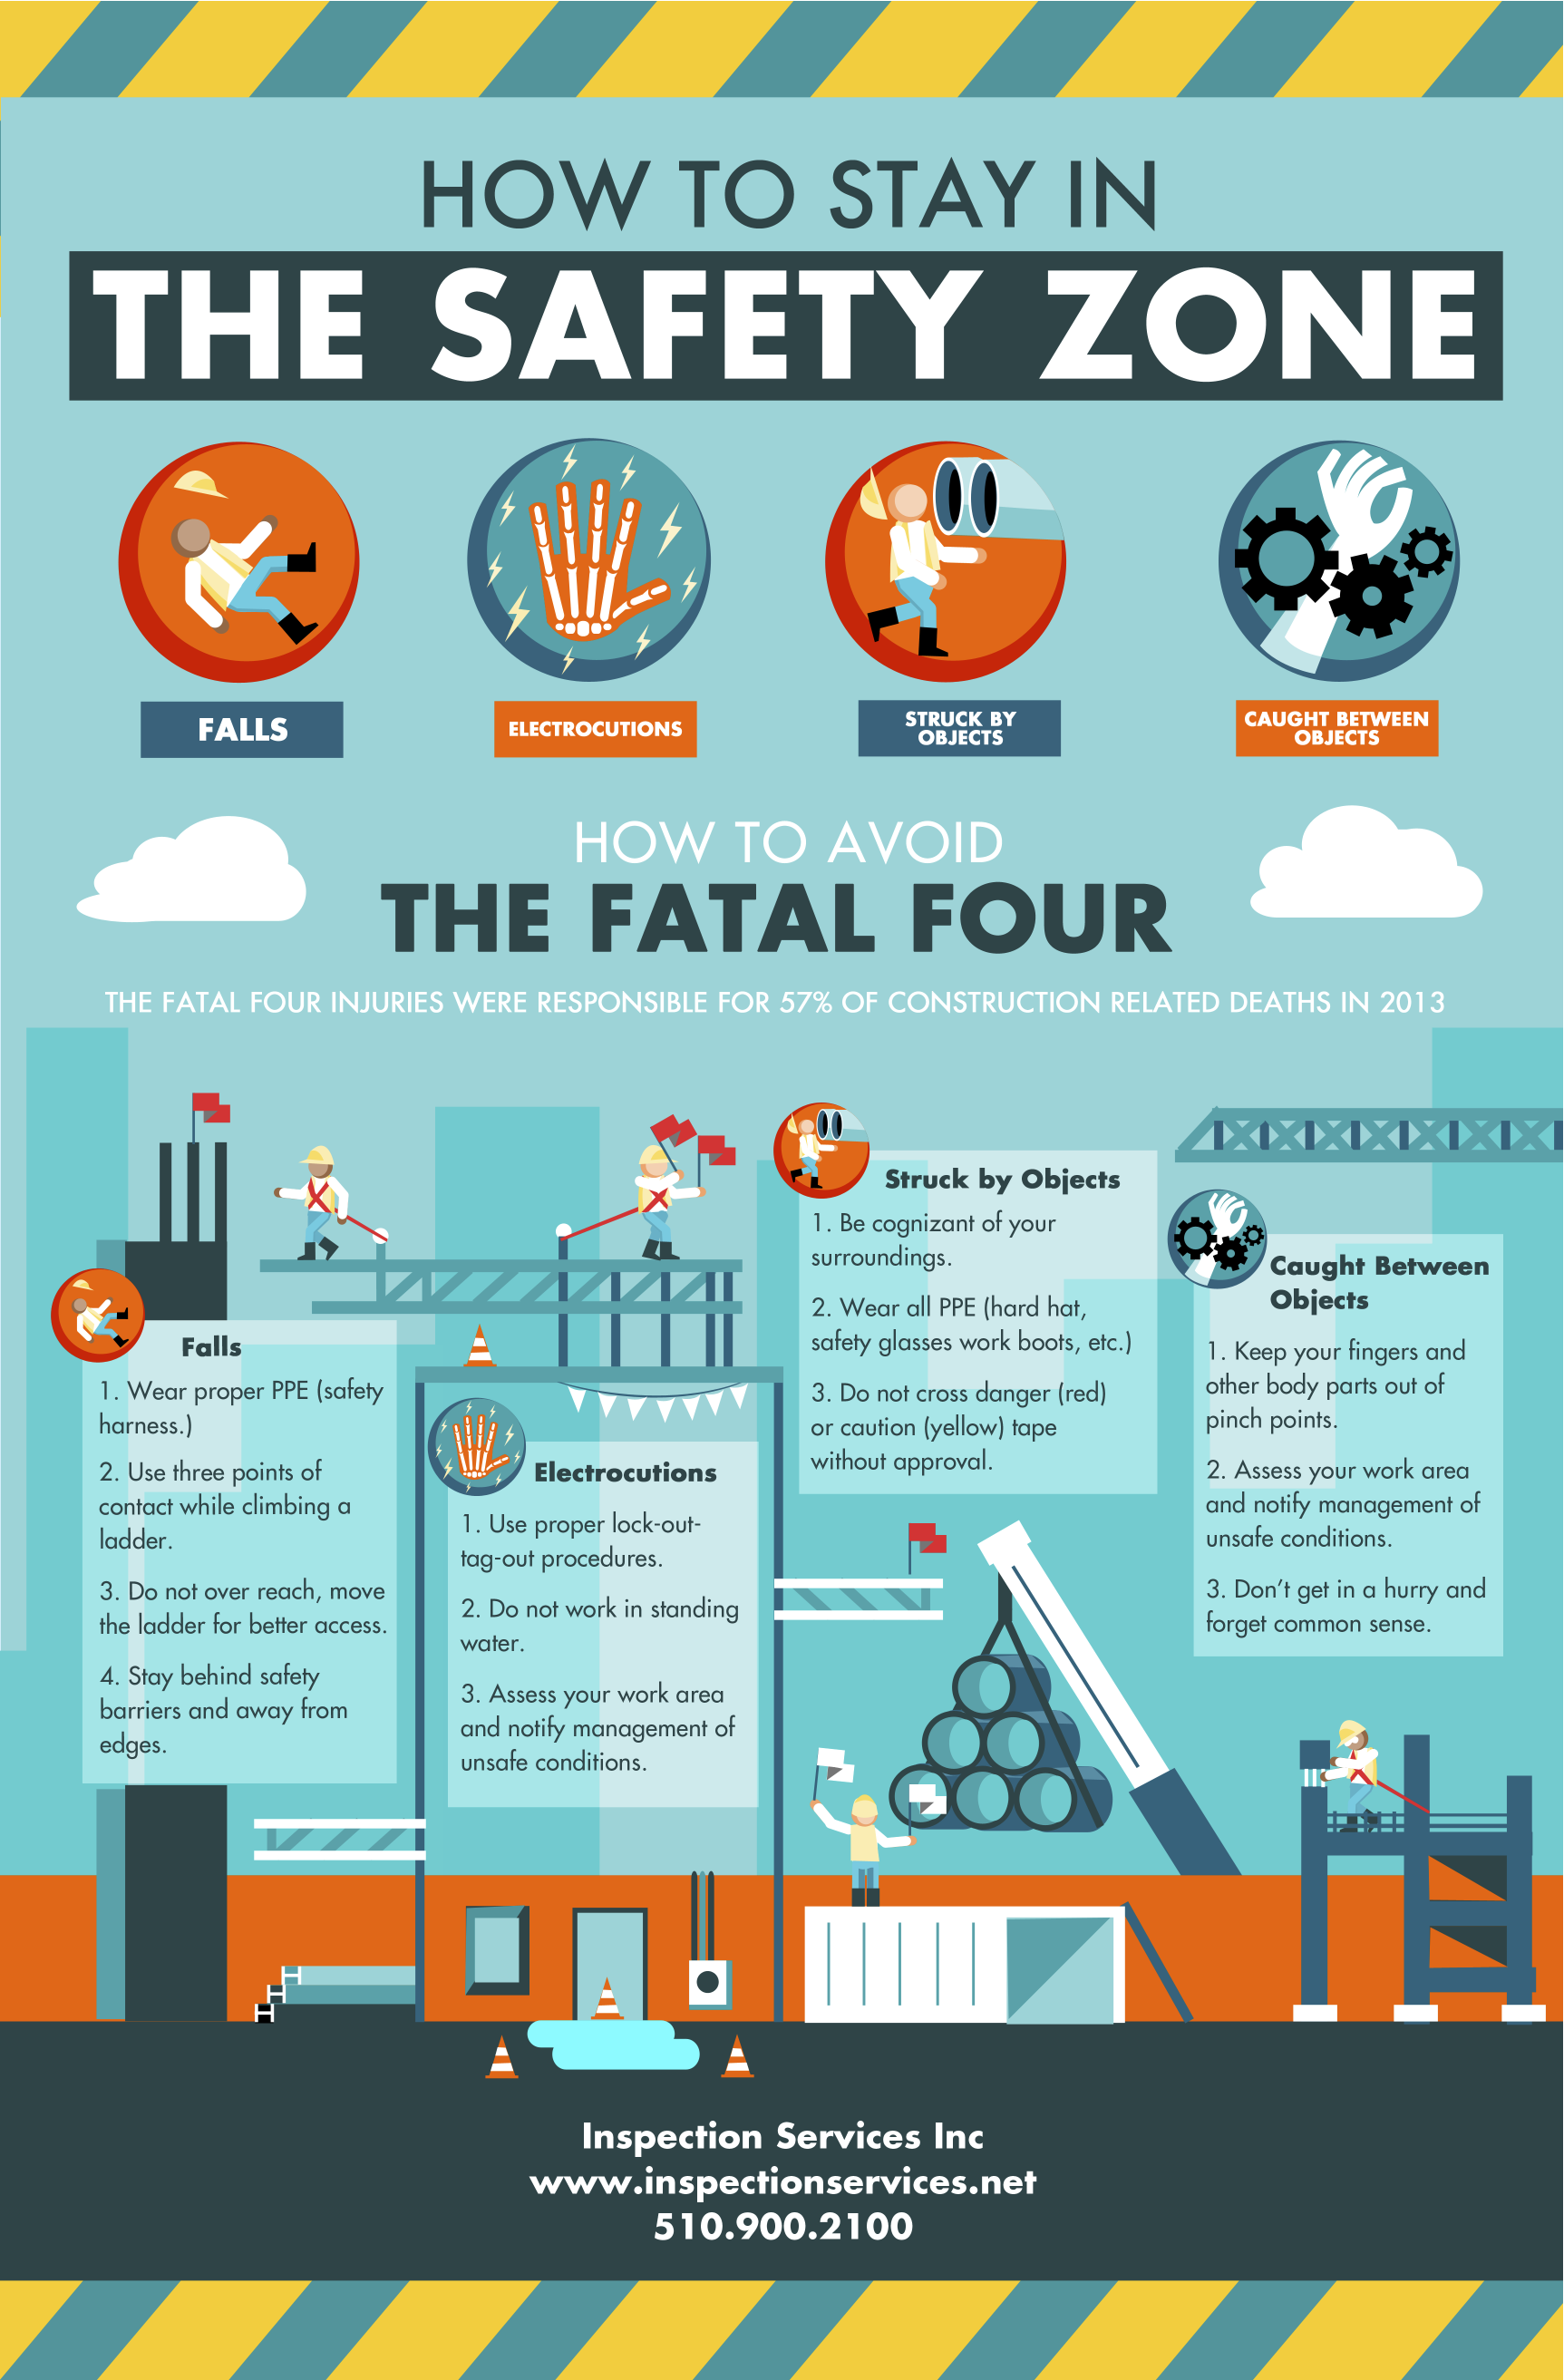 construction safety posters